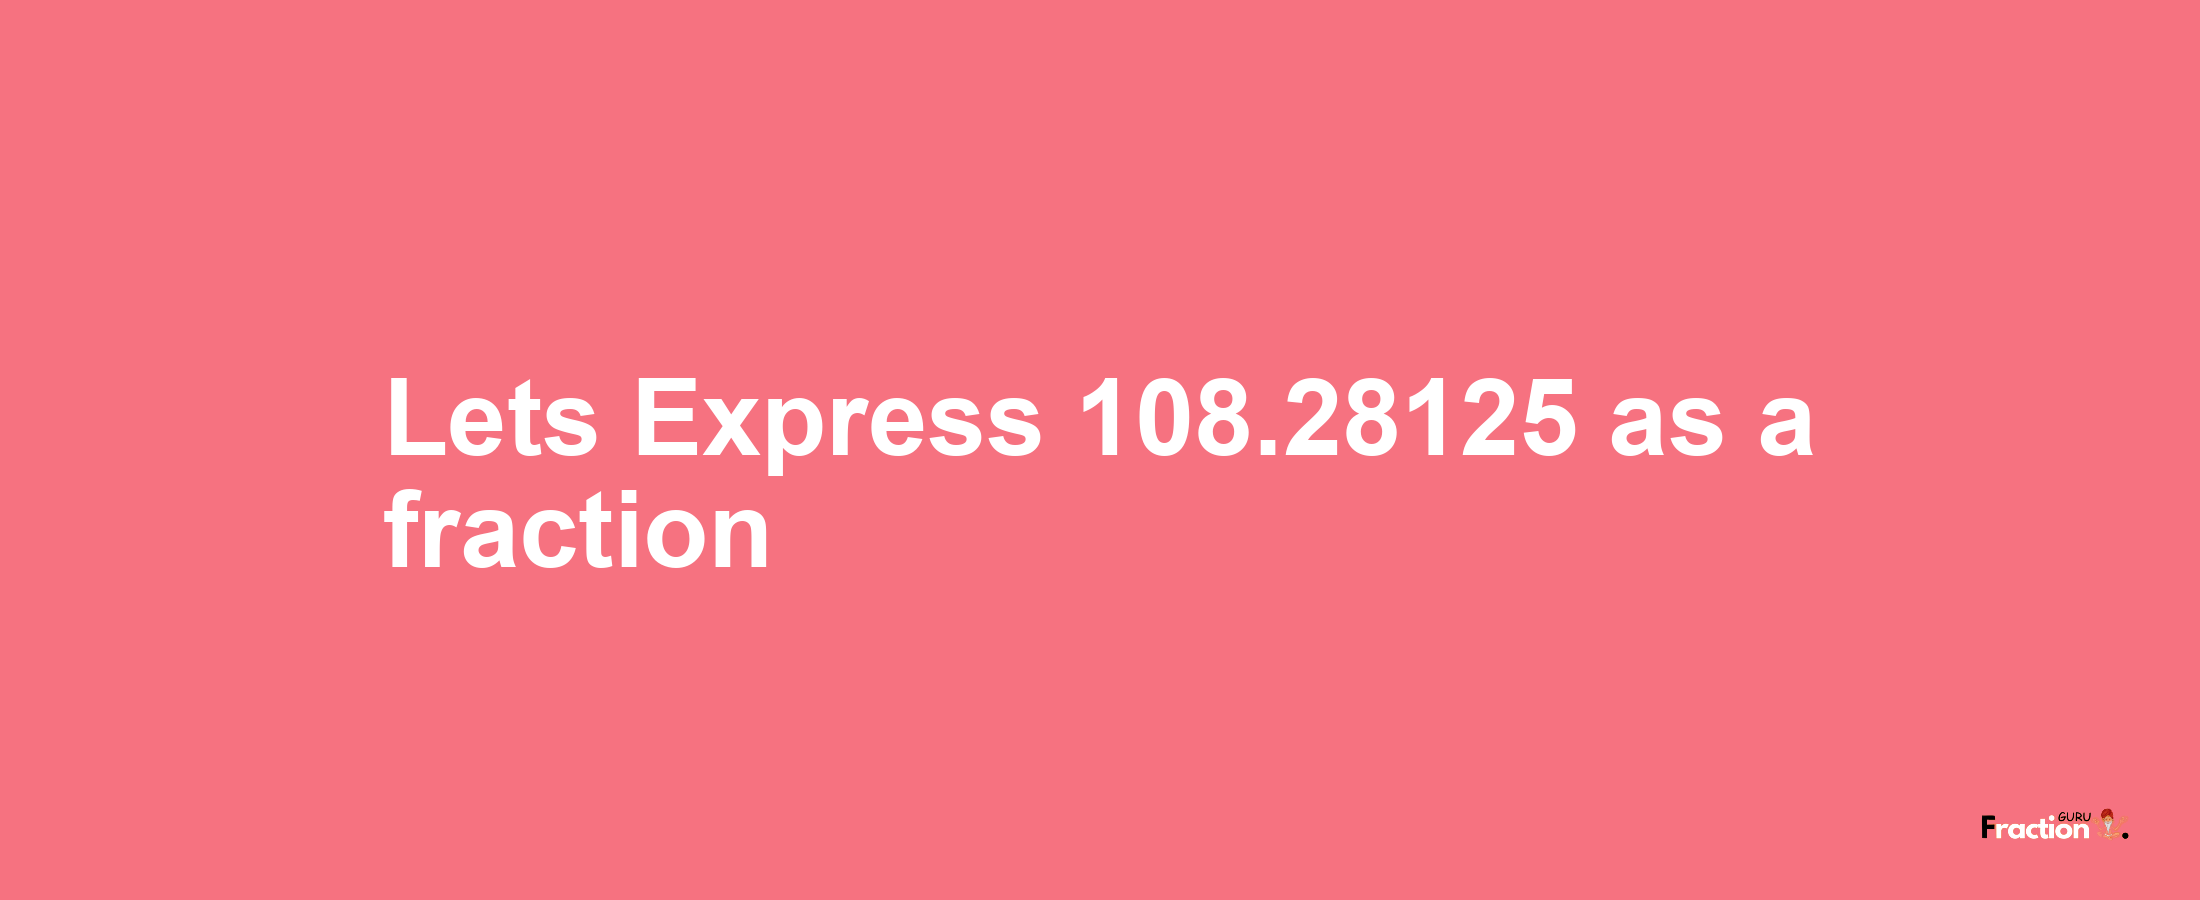 Lets Express 108.28125 as afraction